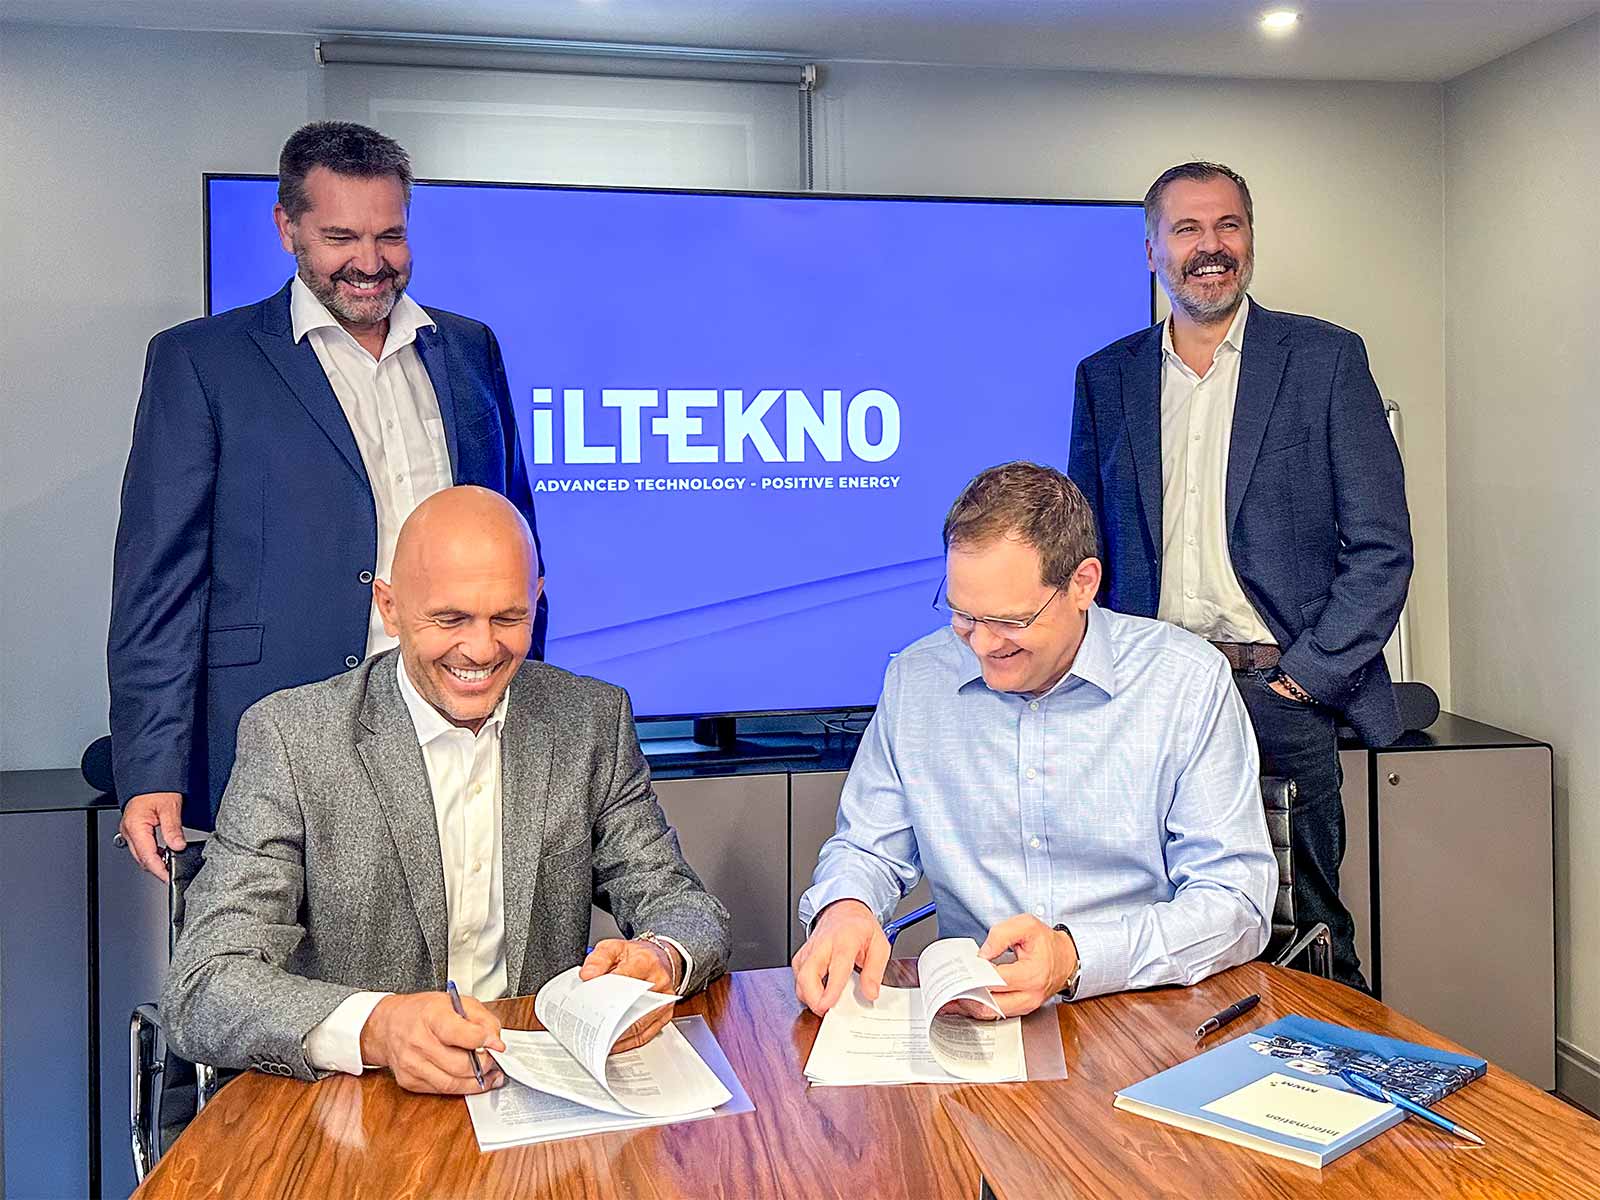 Istanbul, July 26, 2023: Signing of the MWM Solutions Provider agreement for Uzbekistan. From left to right: Andreas Obwaller (CEO of MWM Austria GmbH), Gürcan Gürel (Chairman of the Board of Iltekno), Tim Scott (Commercial Director of MWM), Ali Nihat Dilek (CEO of Iltekno). (Photograph: Provided by Iltekno)